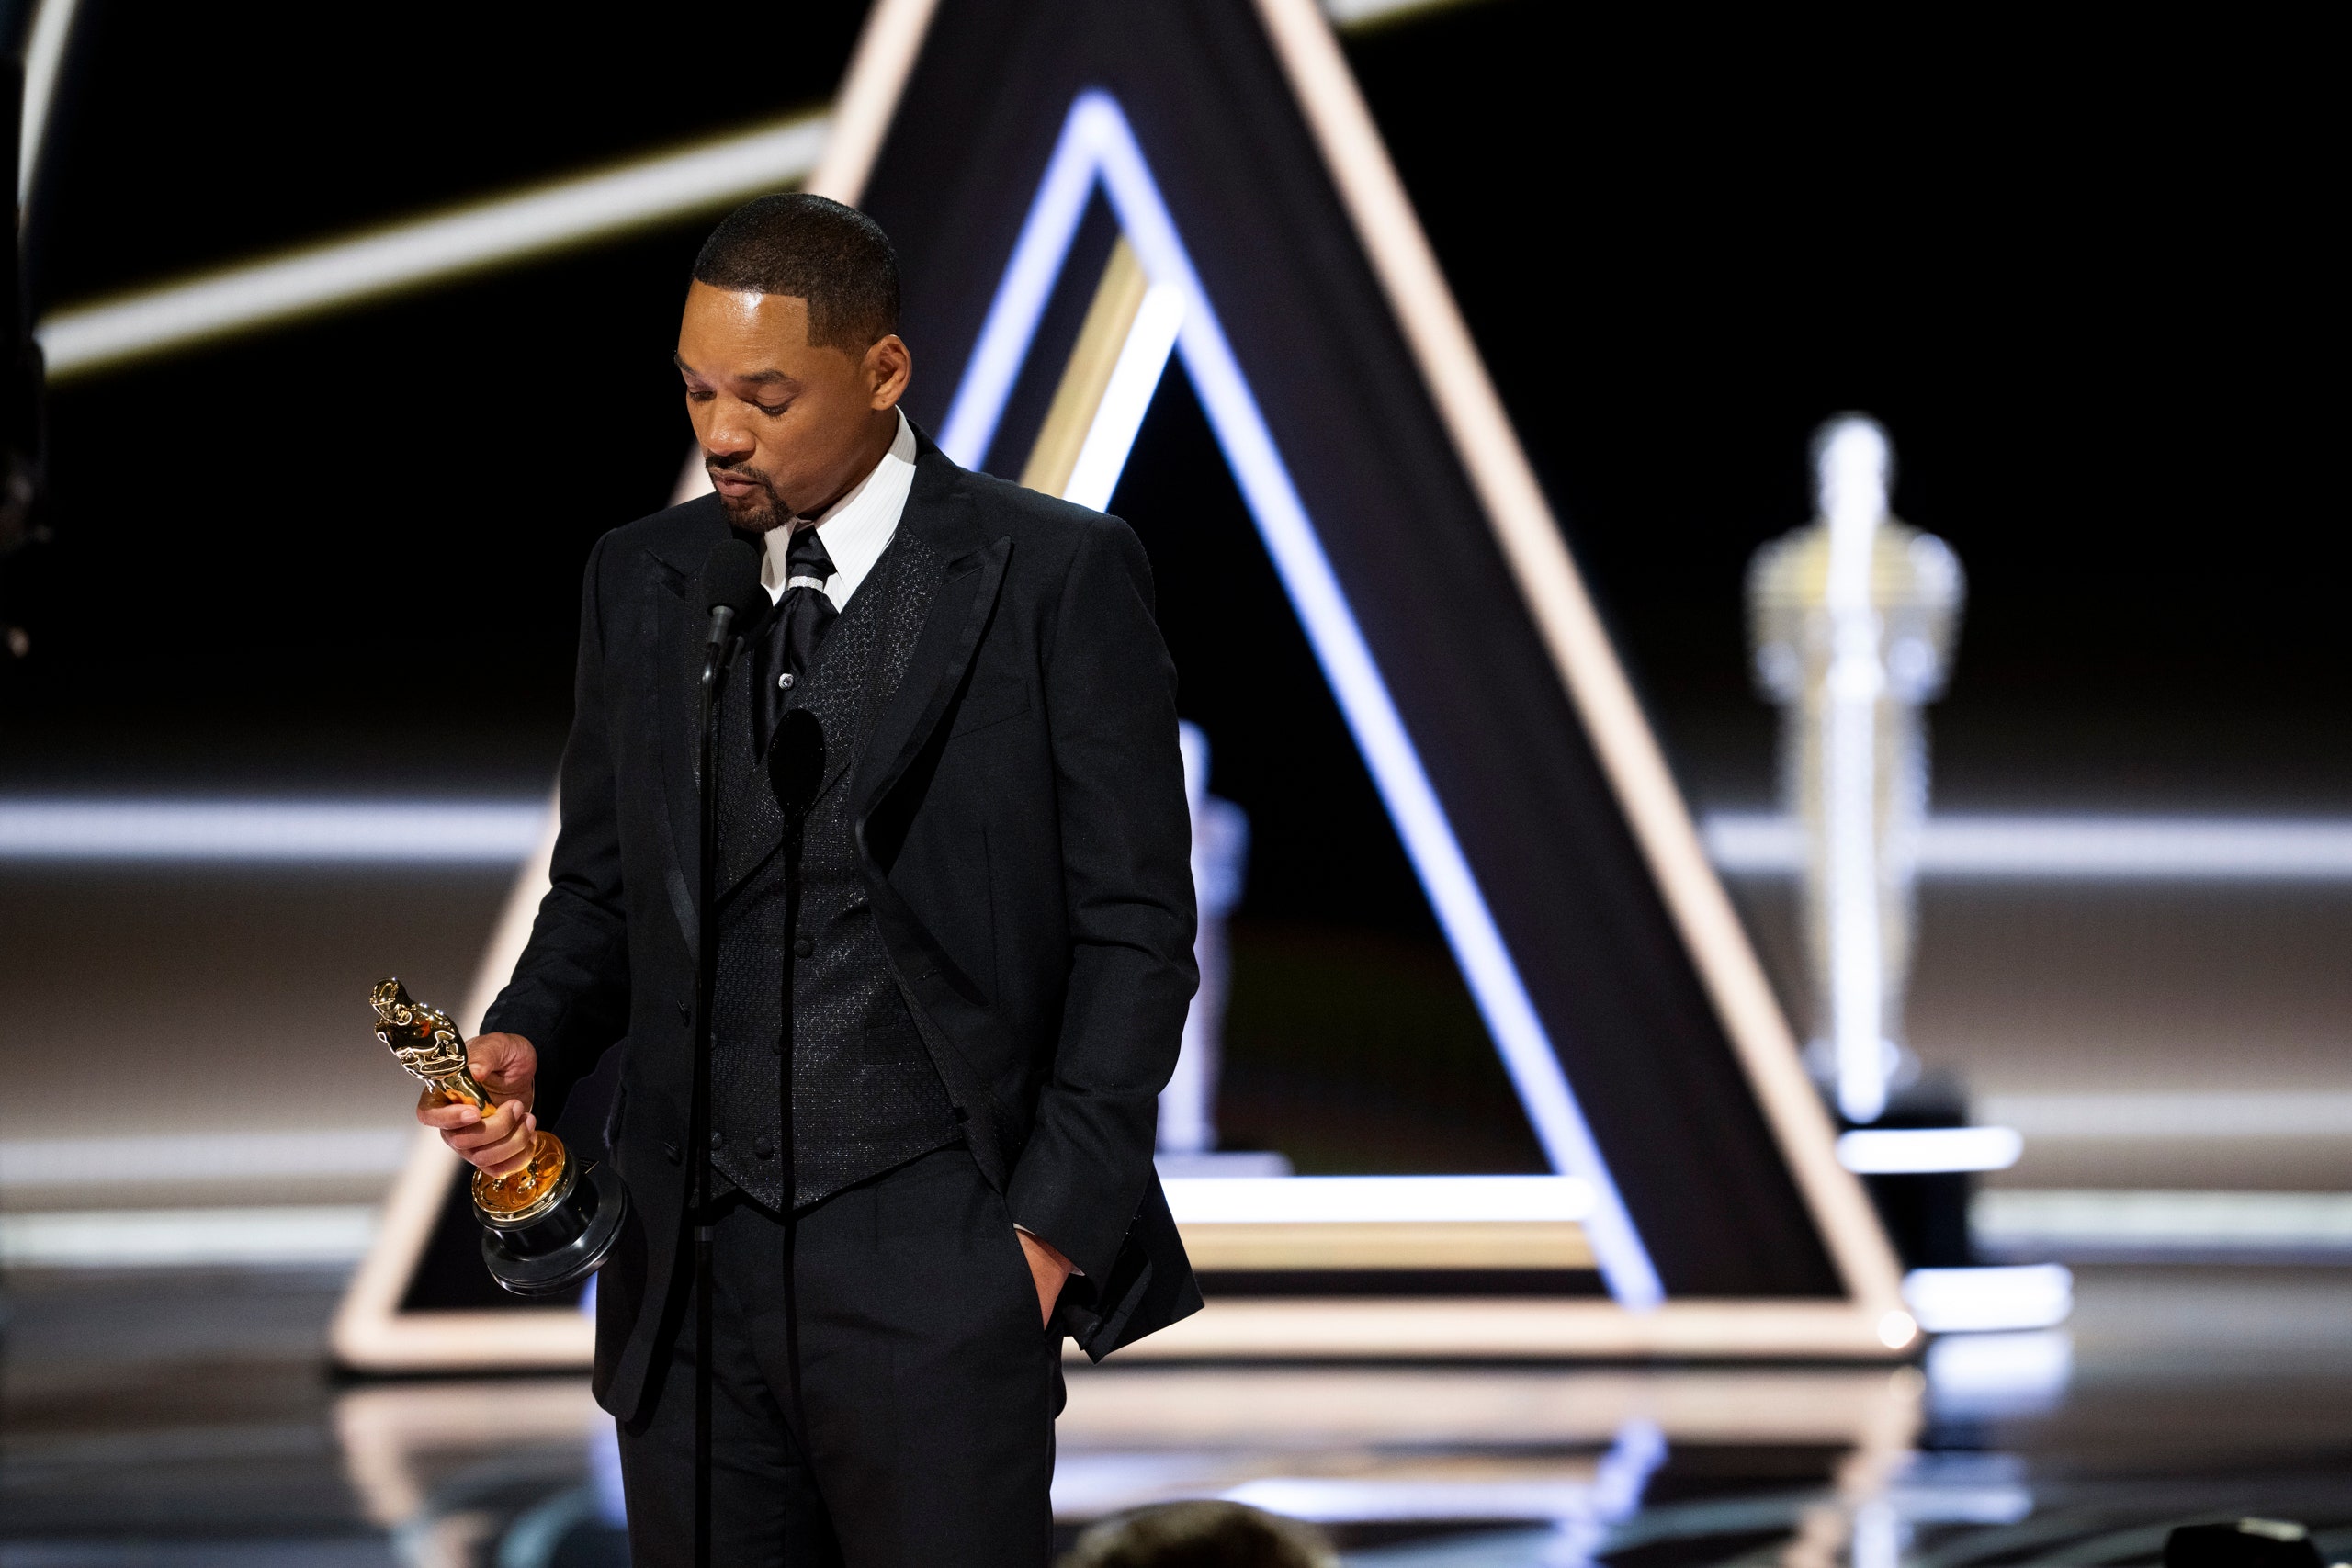 Opinion: The Will Smith Slap